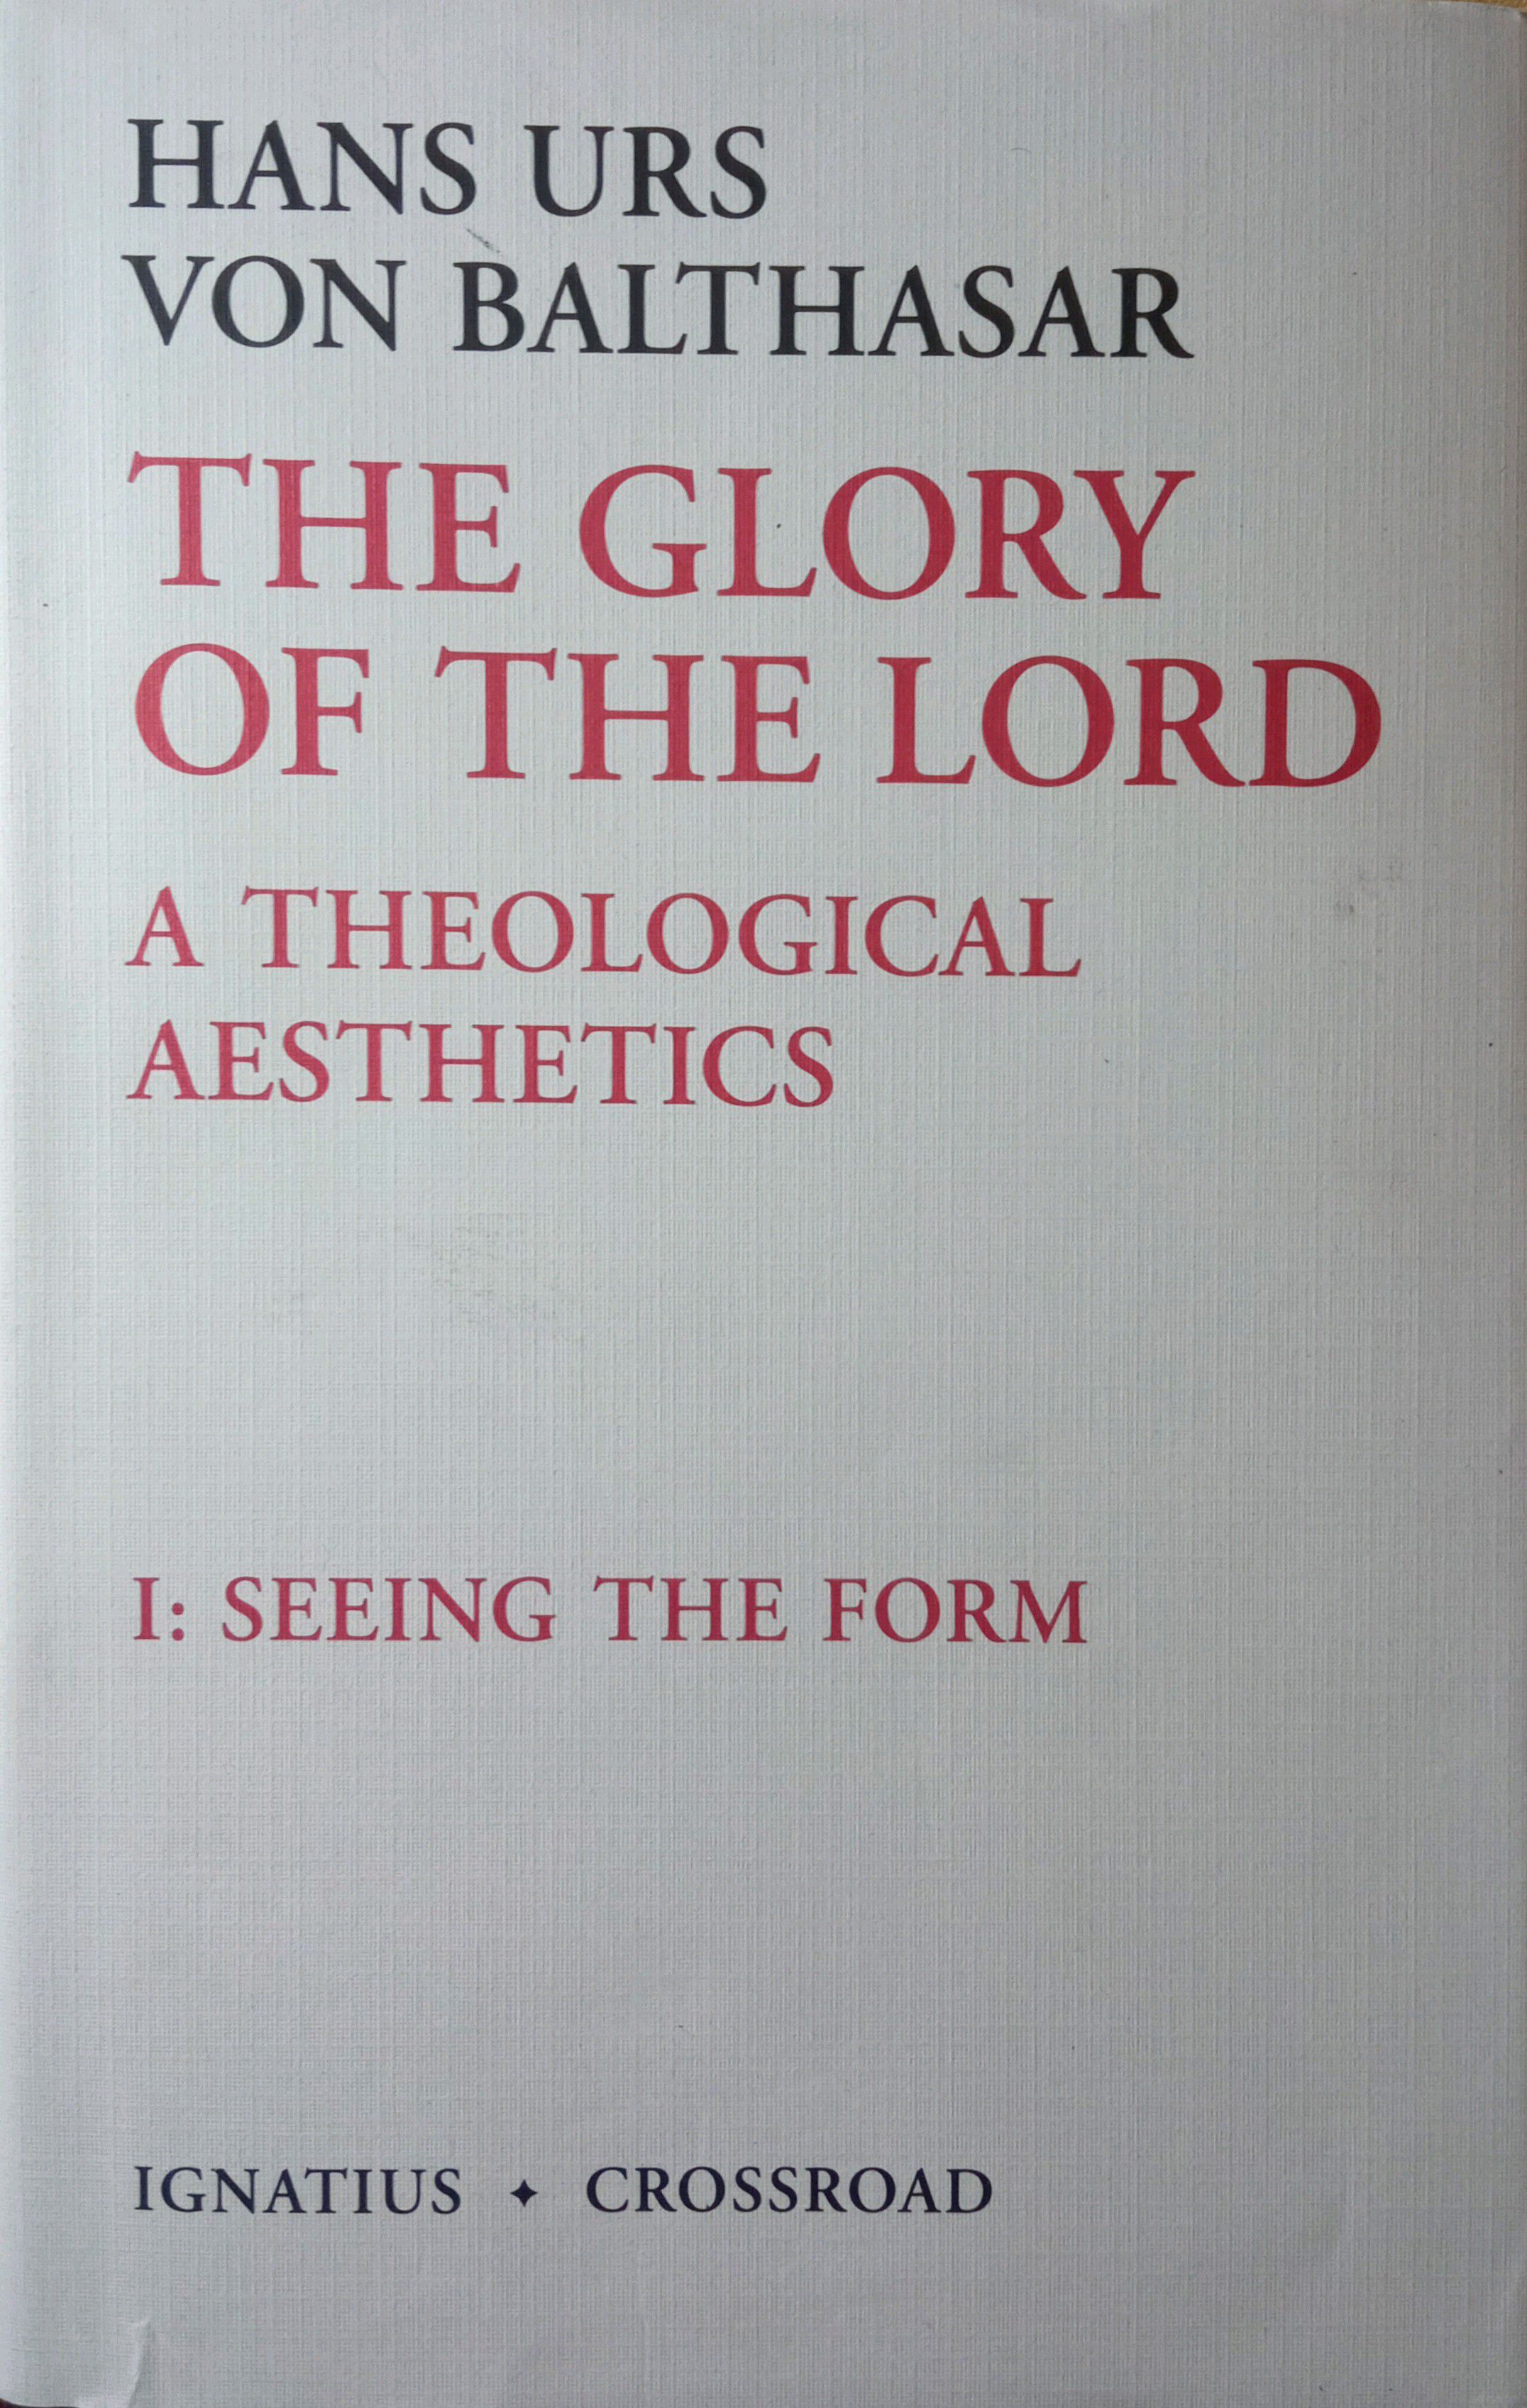 THE GLORY OF THE LORD: A THEOLOGICAL AESTHETICS. SEEING THE FORM